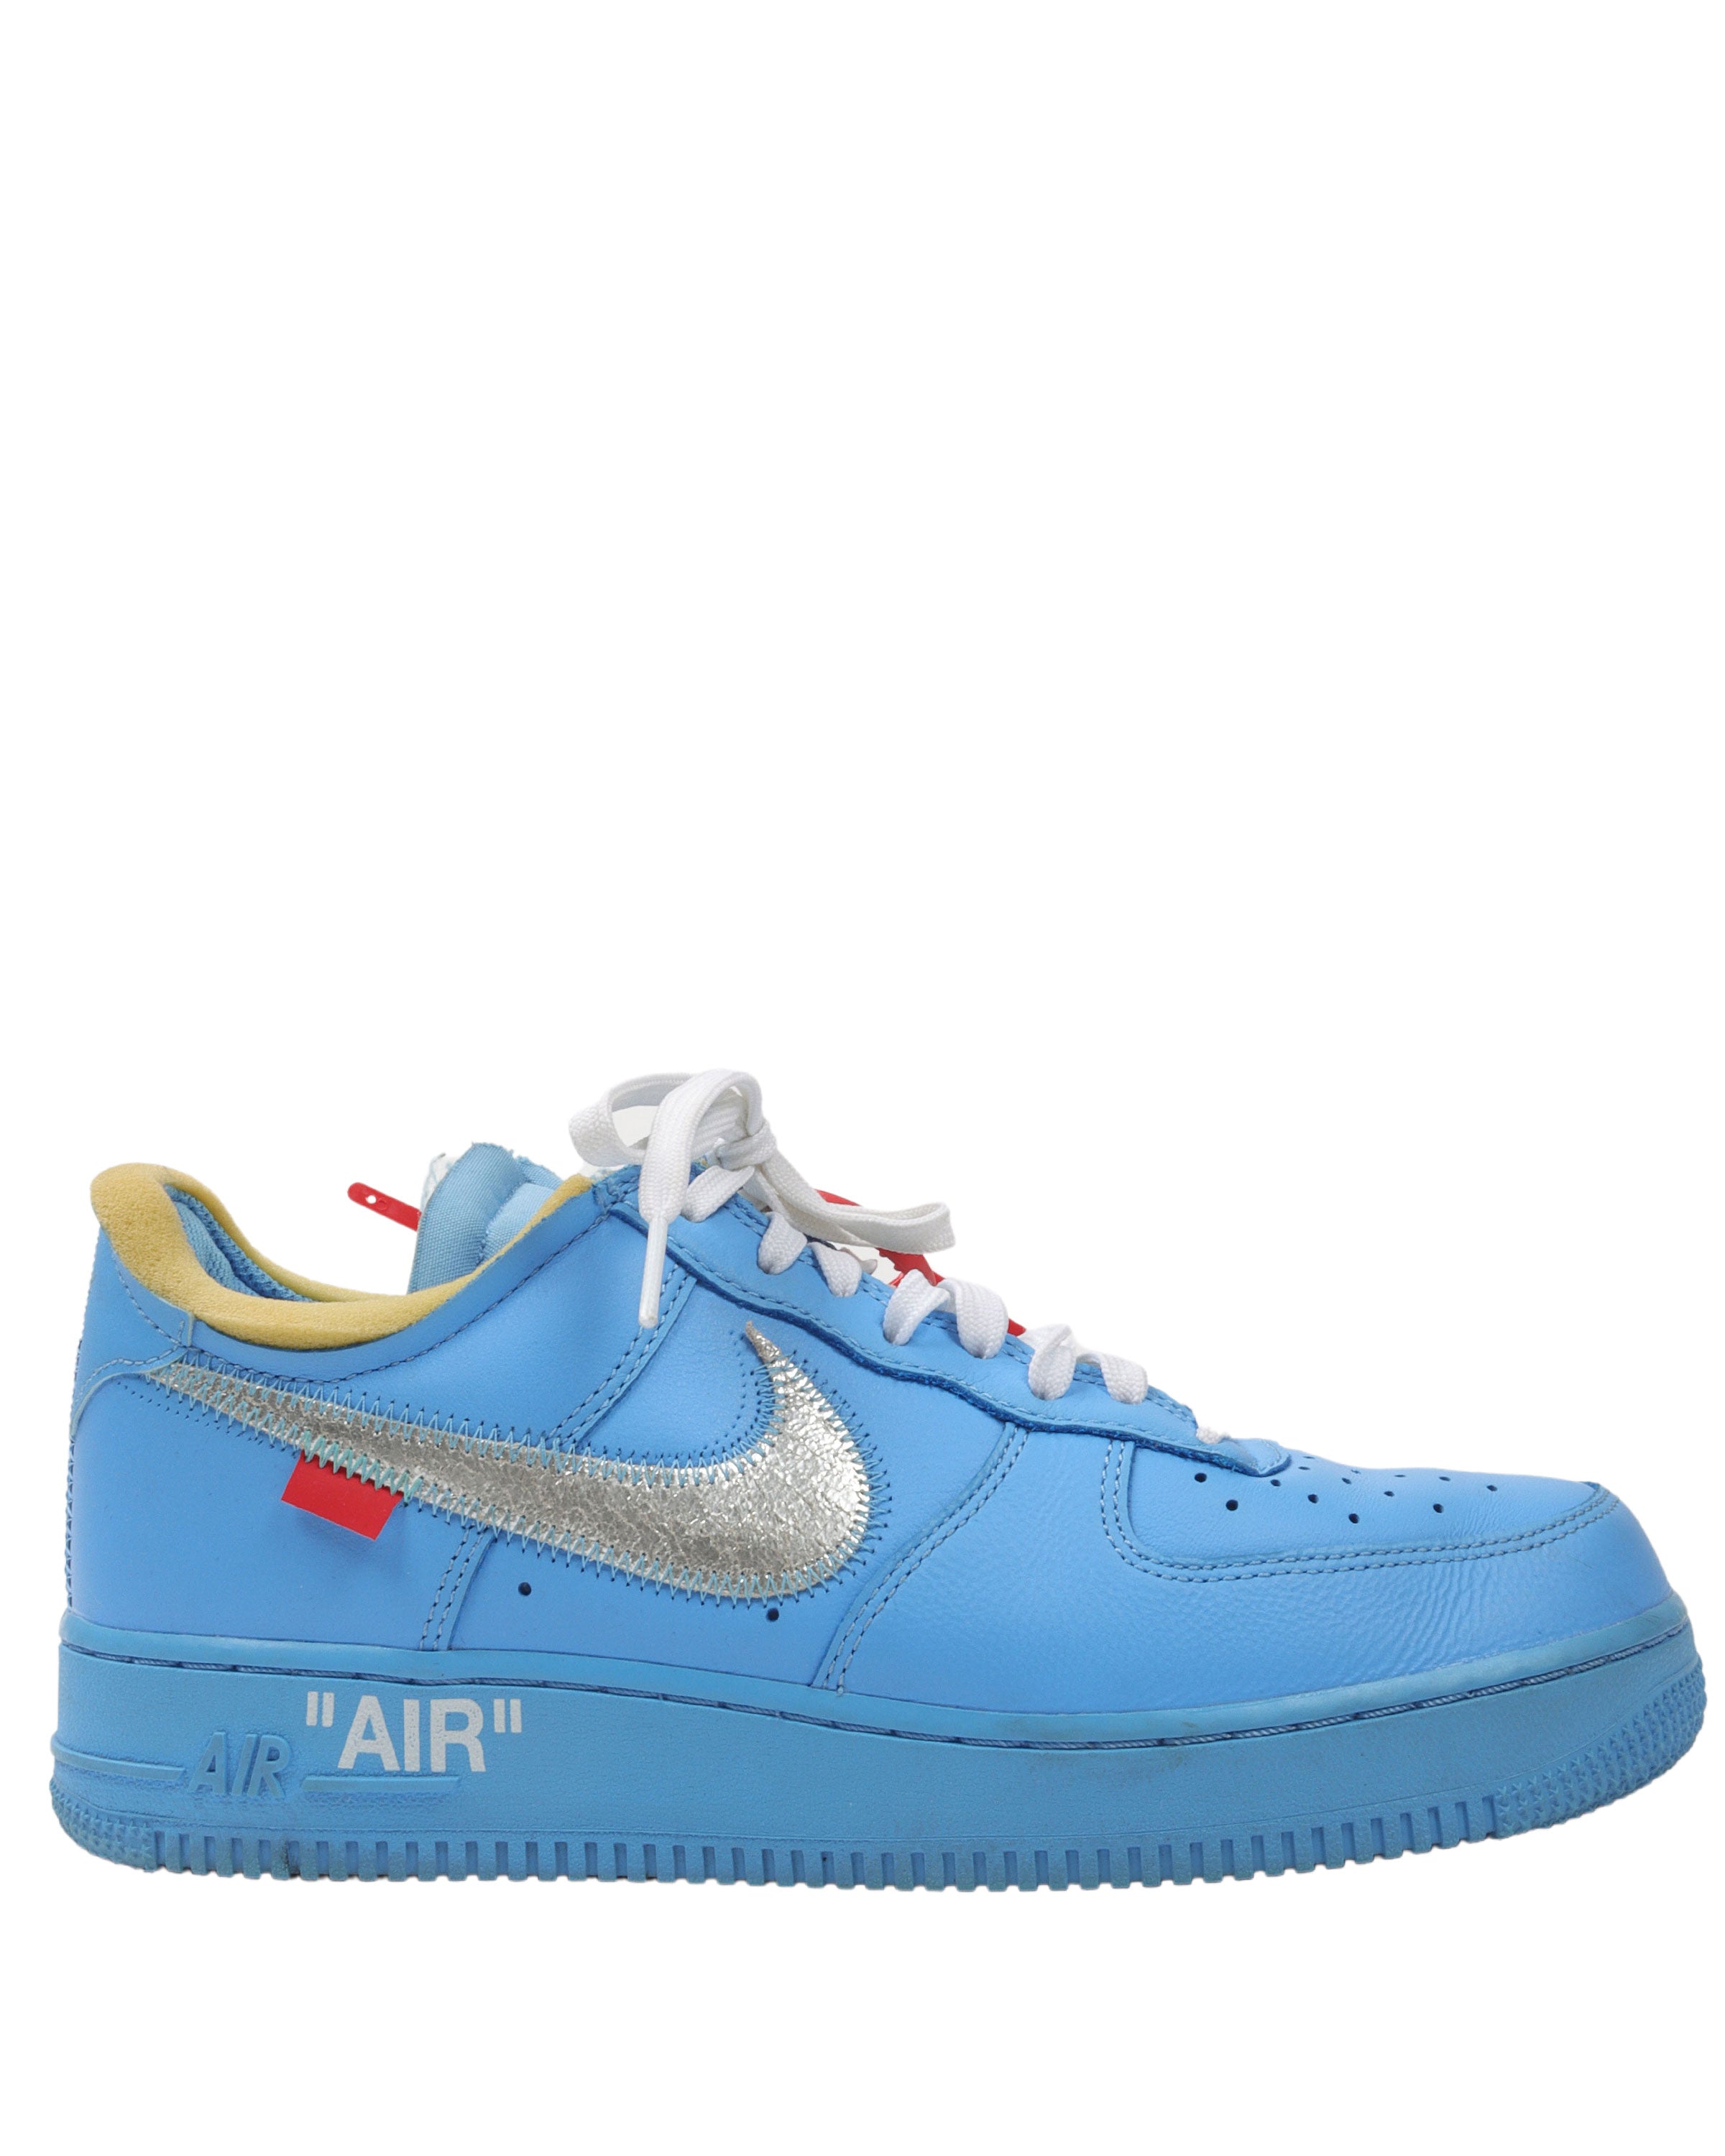 Off-White MCA Air Force 1